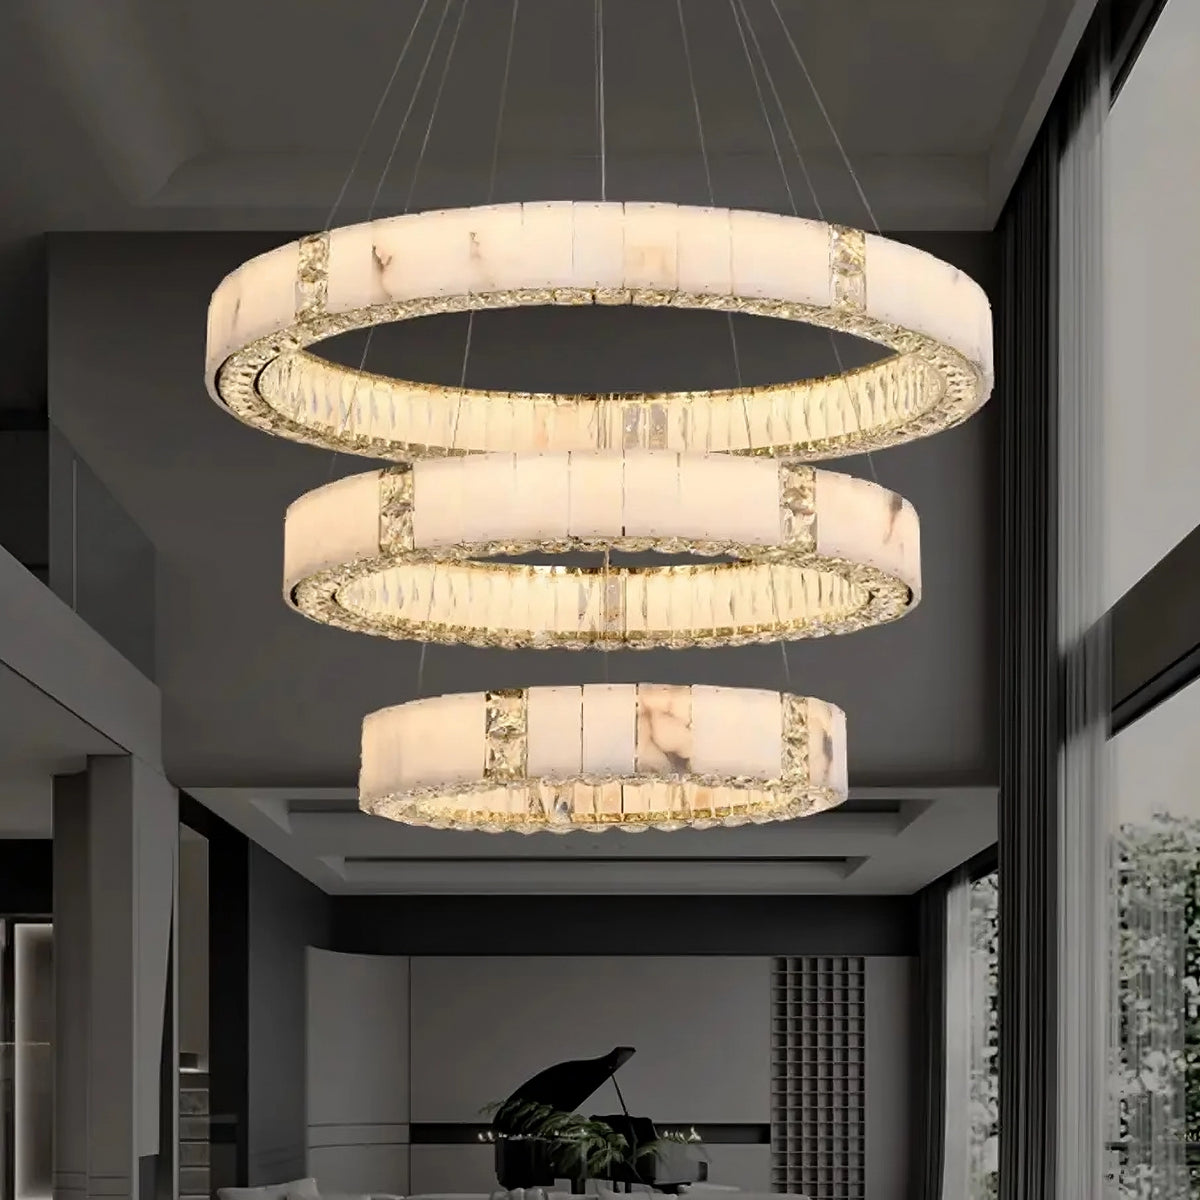 A modern indoor space features a striking Marble & Crystal Modern Chandelier from Morsale.com with circular, translucent rings. Each ring is illuminated, casting a soft glow. Tall windows allow natural light to enter, and a grand piano is partially visible in the background.